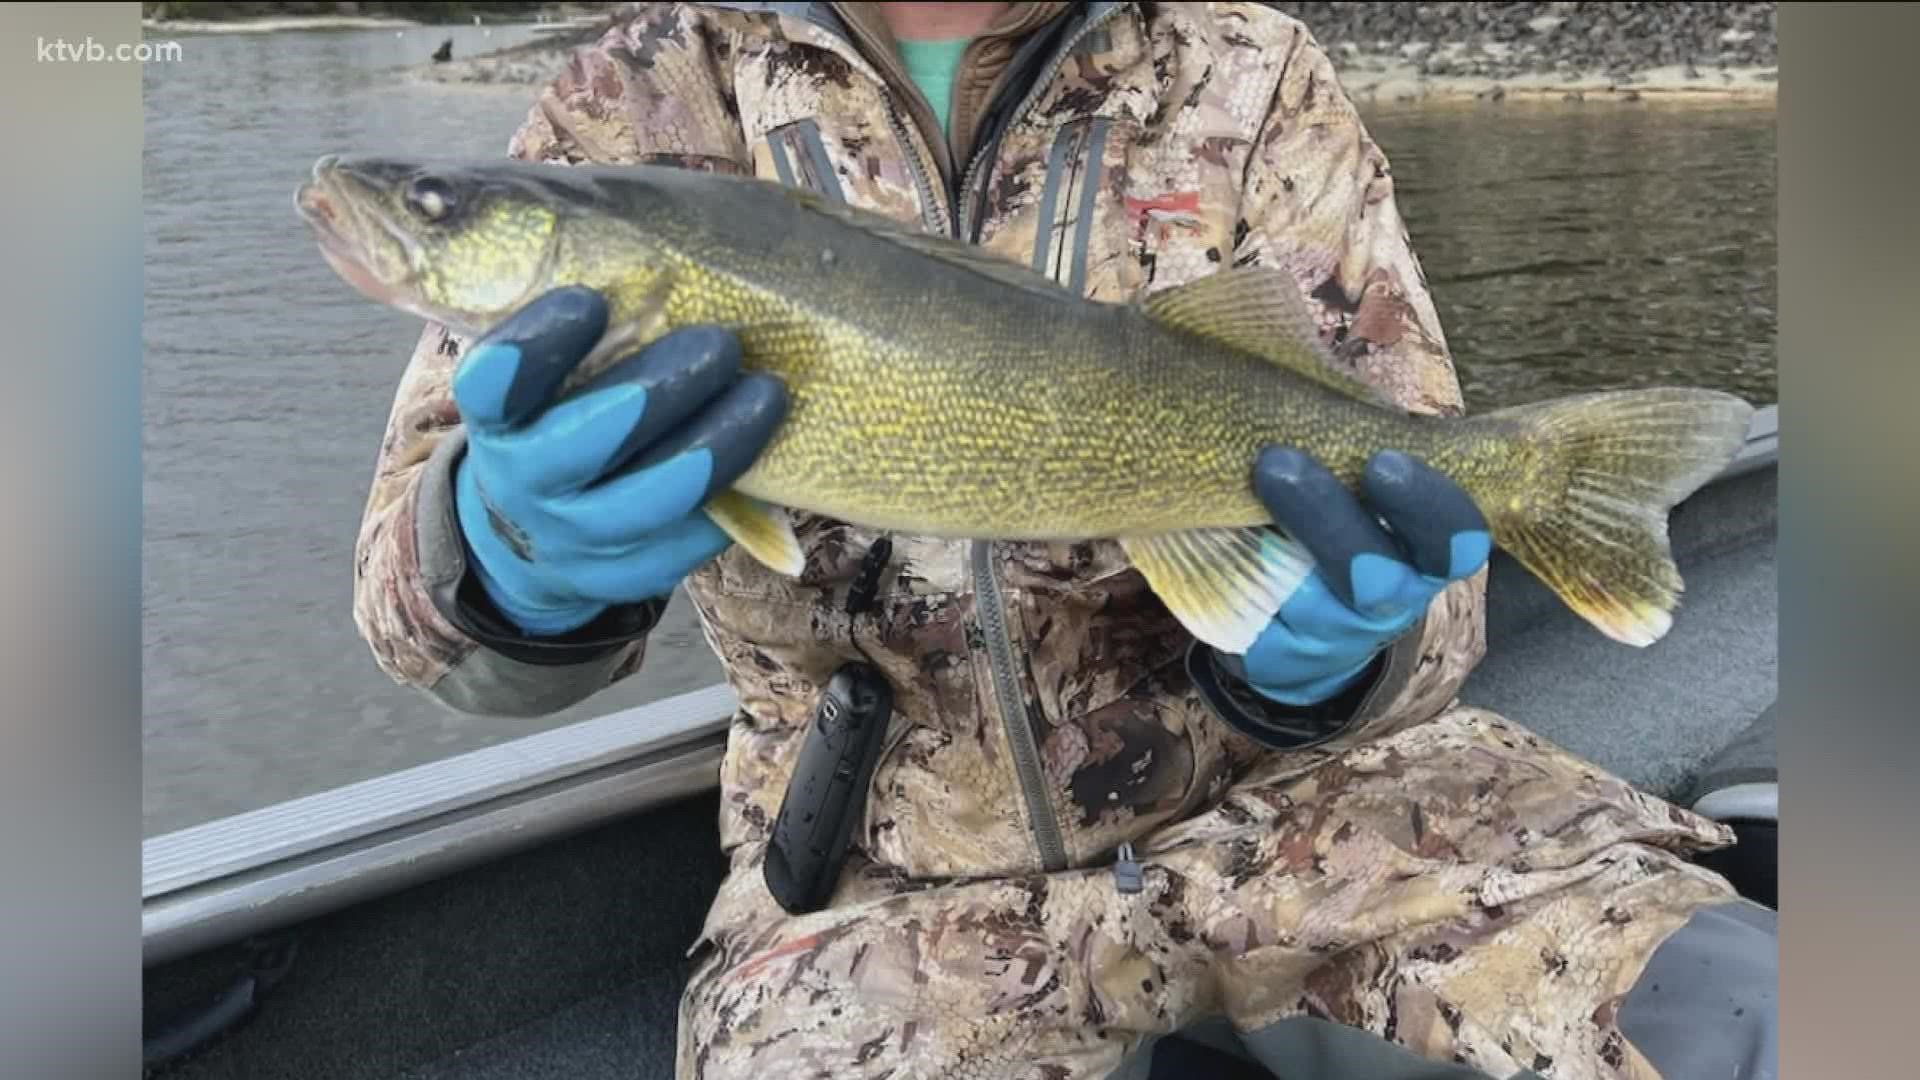 After finding Walleye fish in Lake Lowell and Lake Cascade, Idaho Fish and Game asks anglers to report any walleye catches.